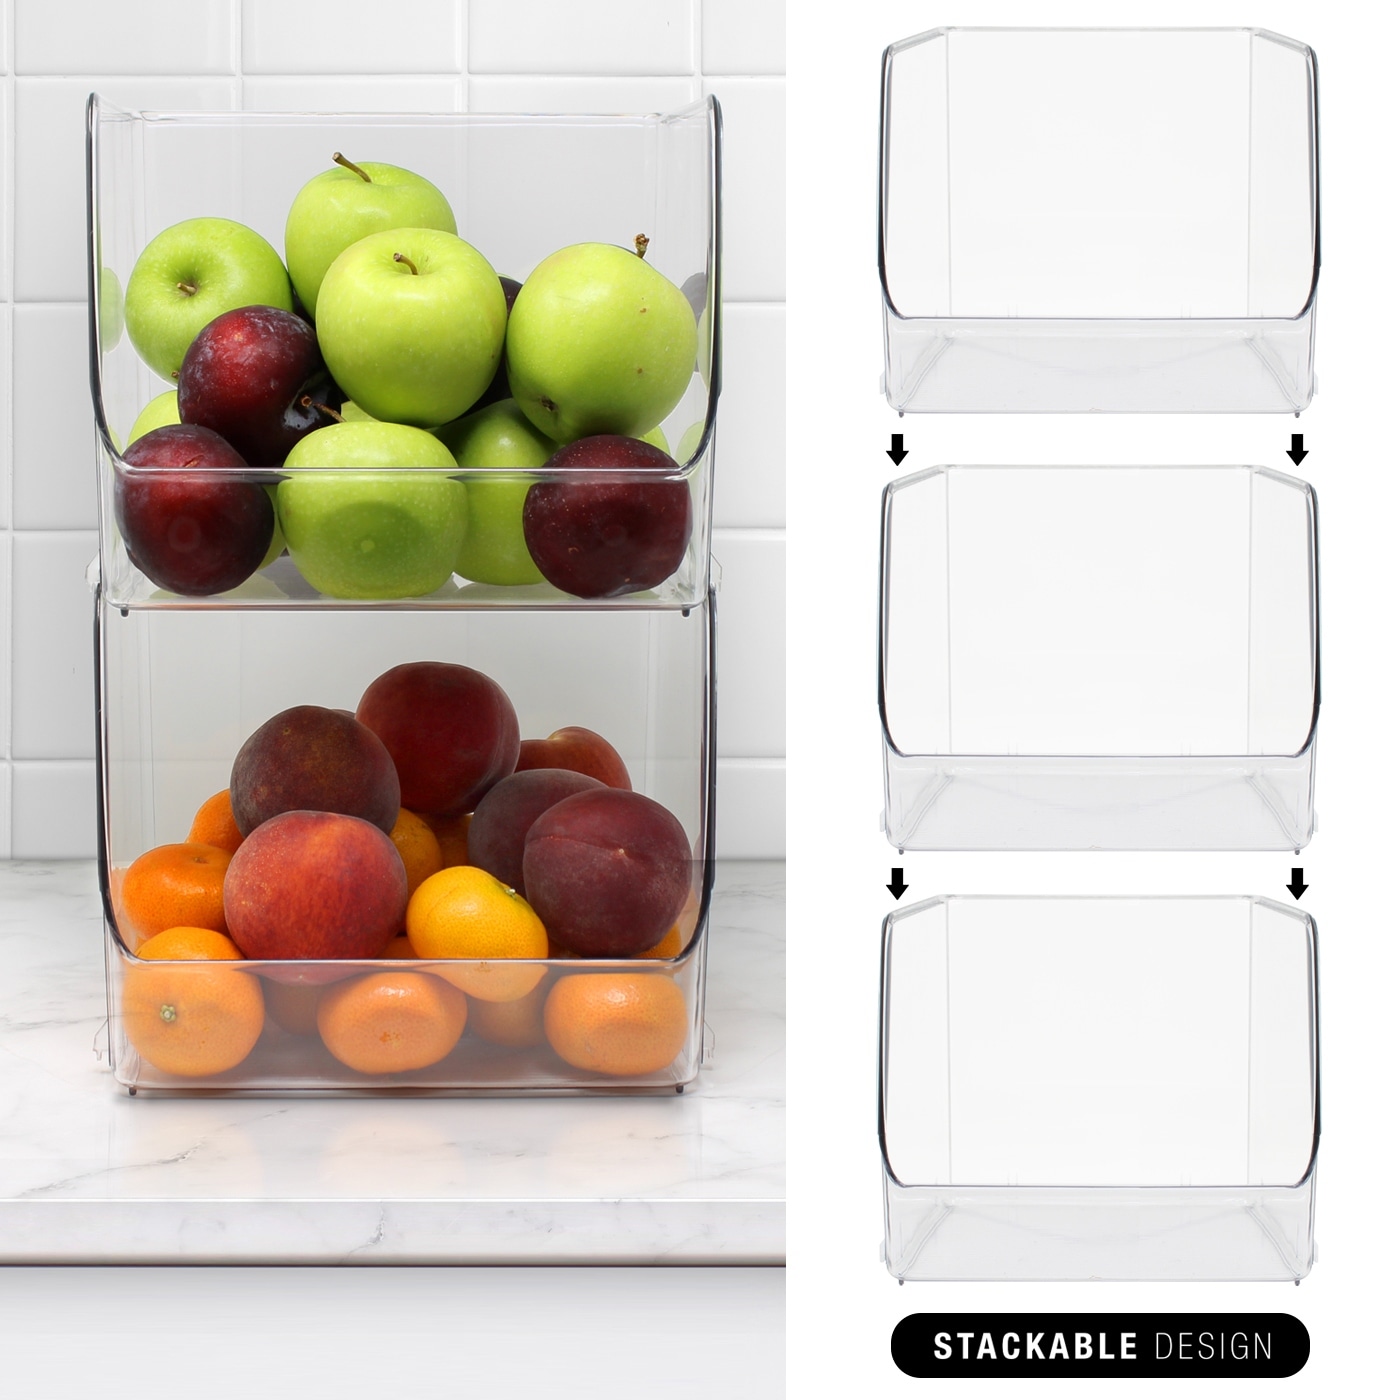 https://ak1.ostkcdn.com/images/products/is/images/direct/c64d47f7bcd473ef75e996a5156b47228e0f8ec0/Open-Plastic-Storage-Bins-Clear-Pantry-Organizer-Box-Containers.jpg